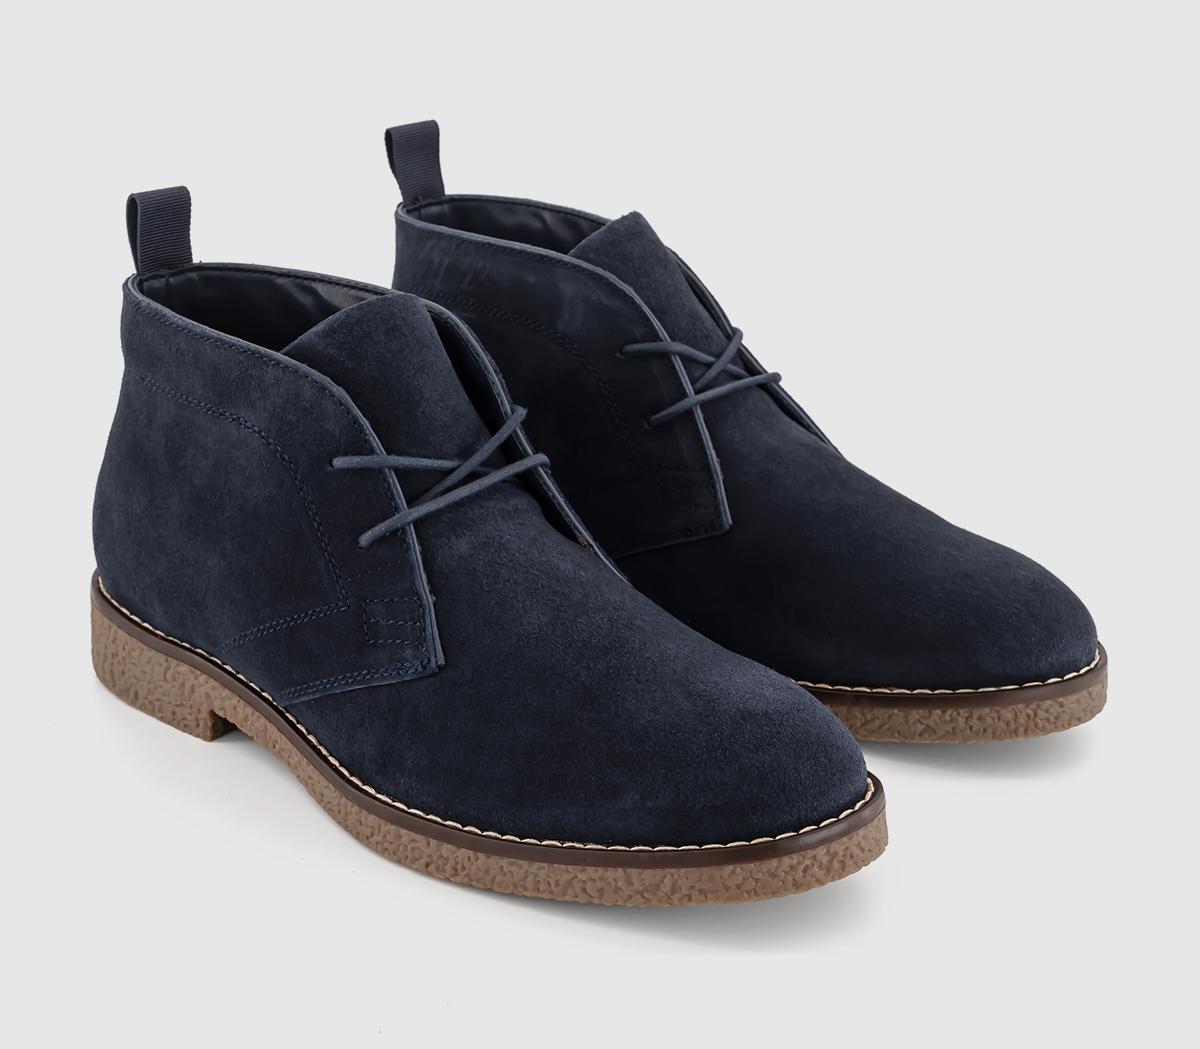 OFFICE Mens Byron Suede Desert Boots Navy Blue, 9